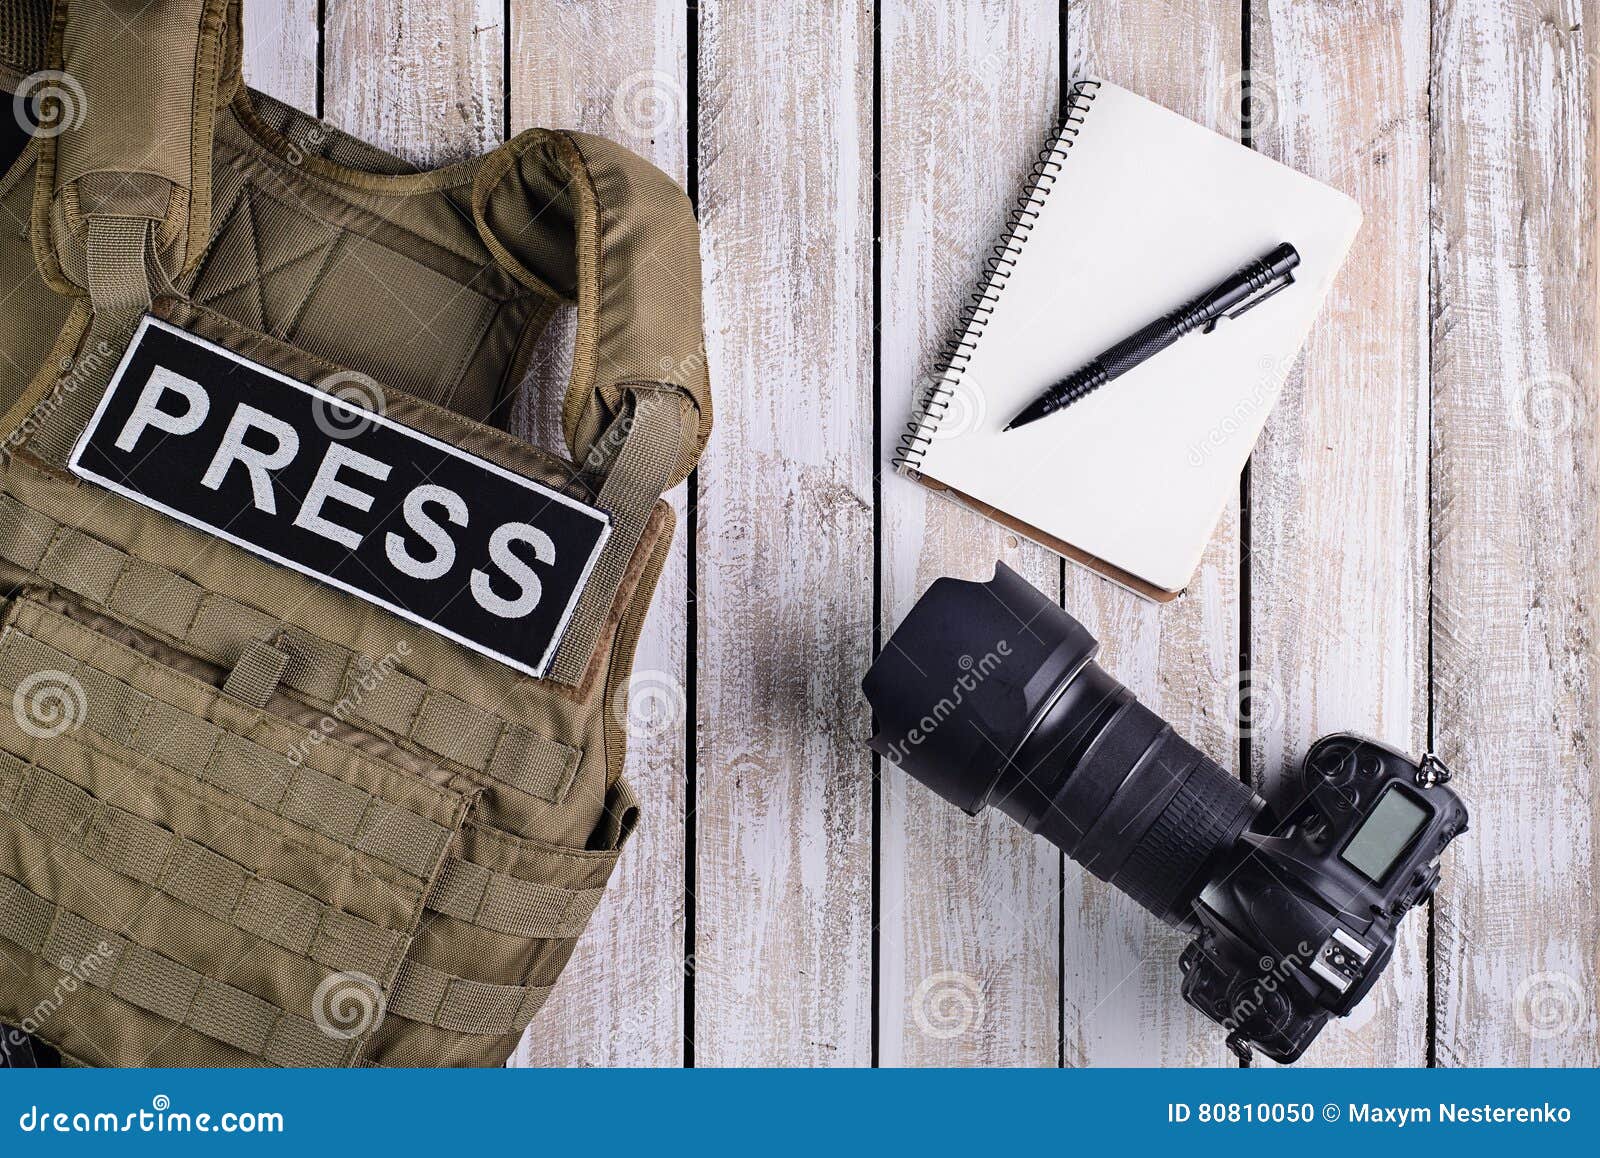 body armor for journalist, notebook and camera